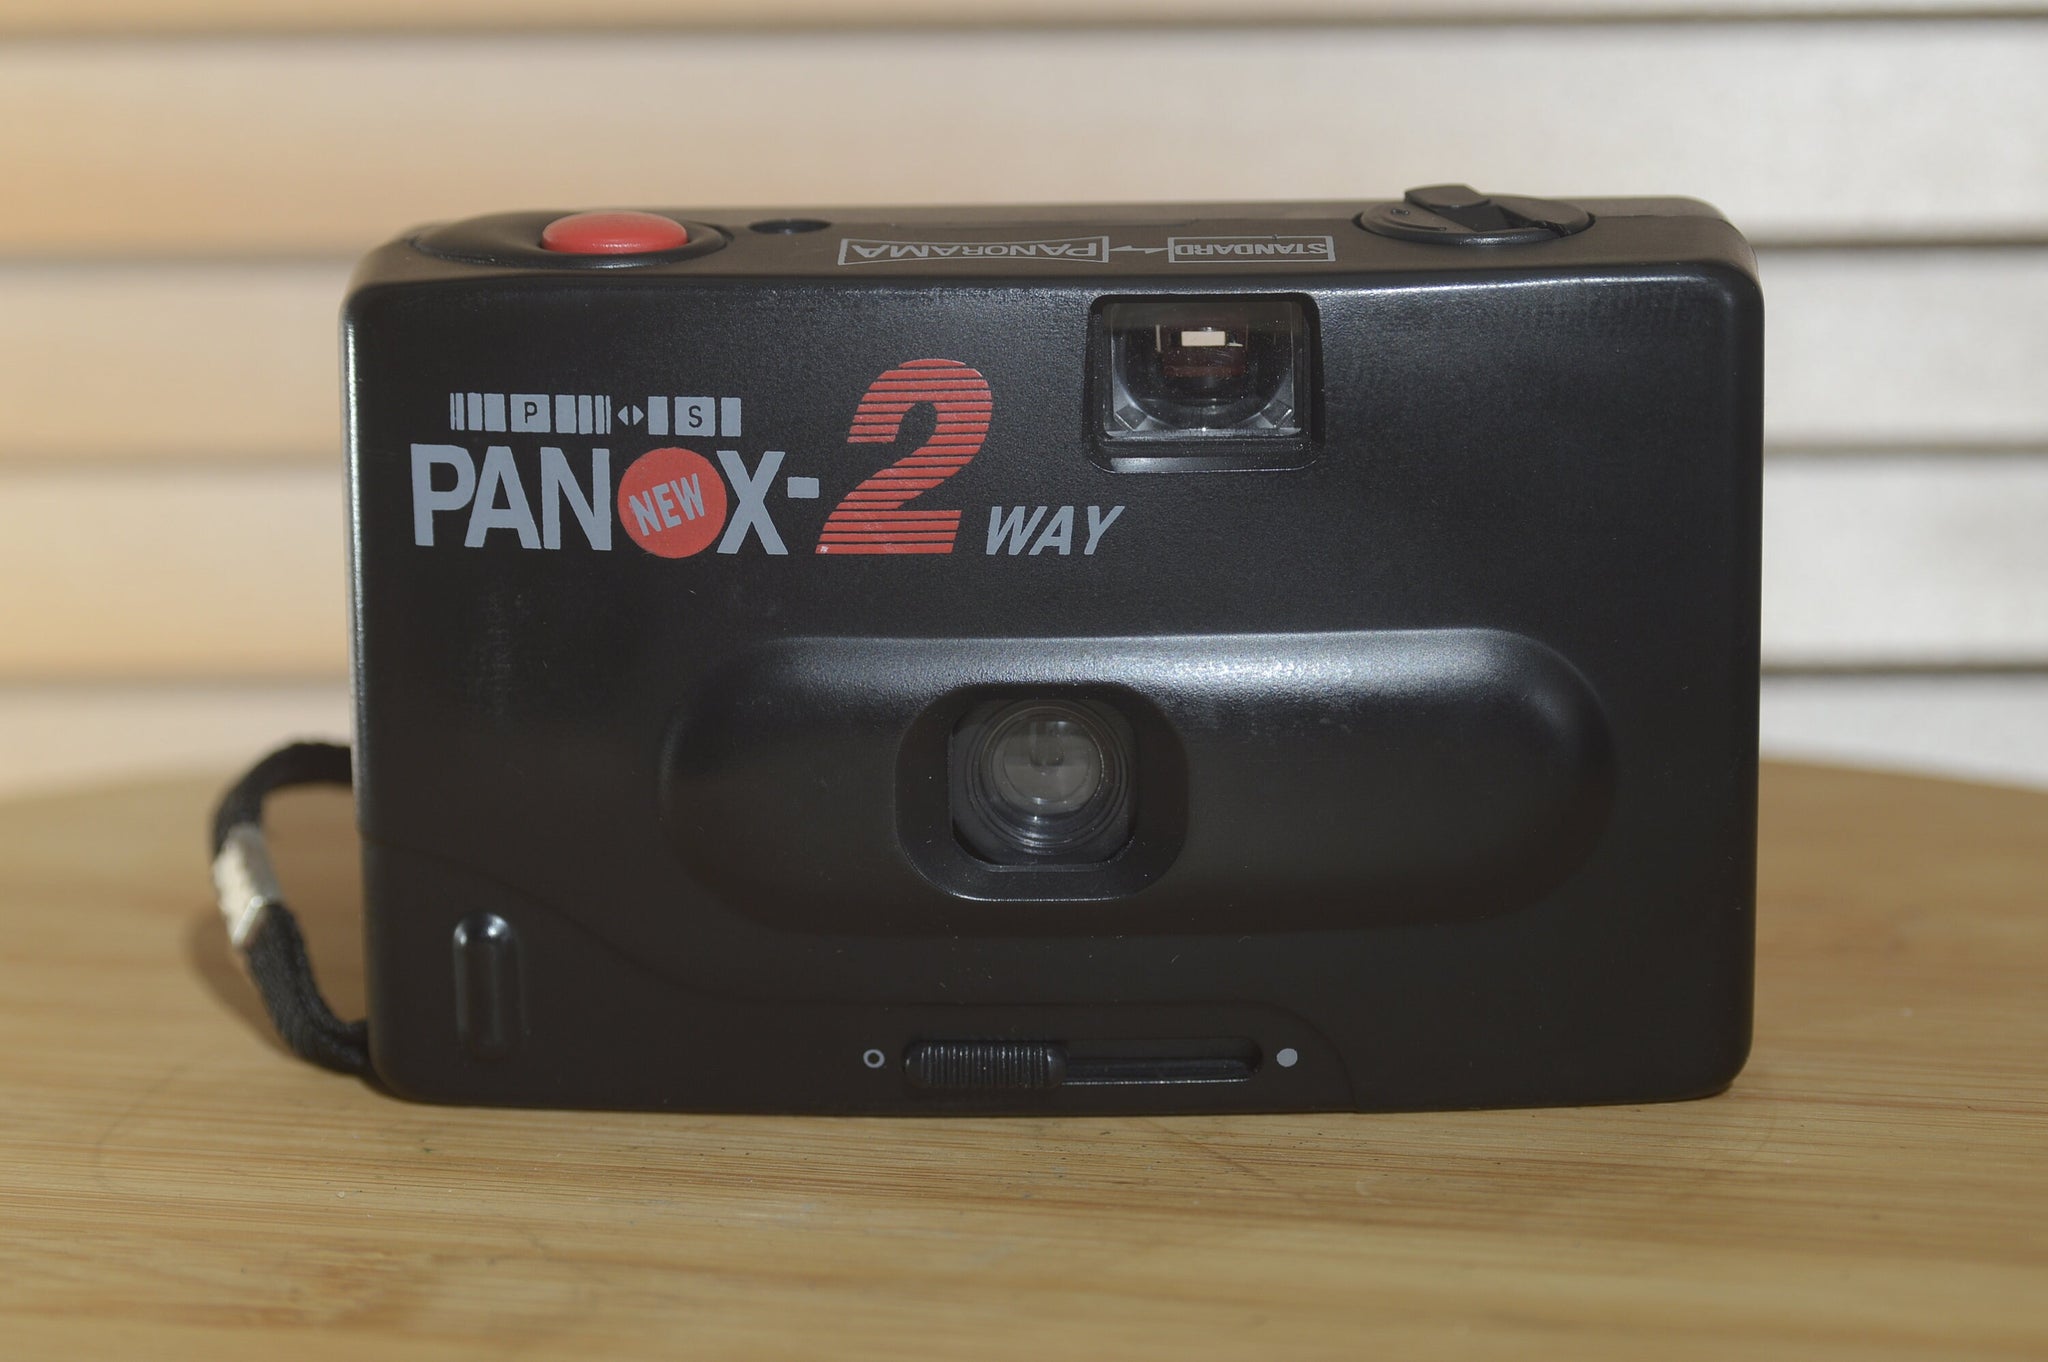 Vintage Panox - 2 Way 35mm Compact Camera. Great for beginners or travelling Photography. - RewindCameras quality vintage cameras, fully tested and serviced